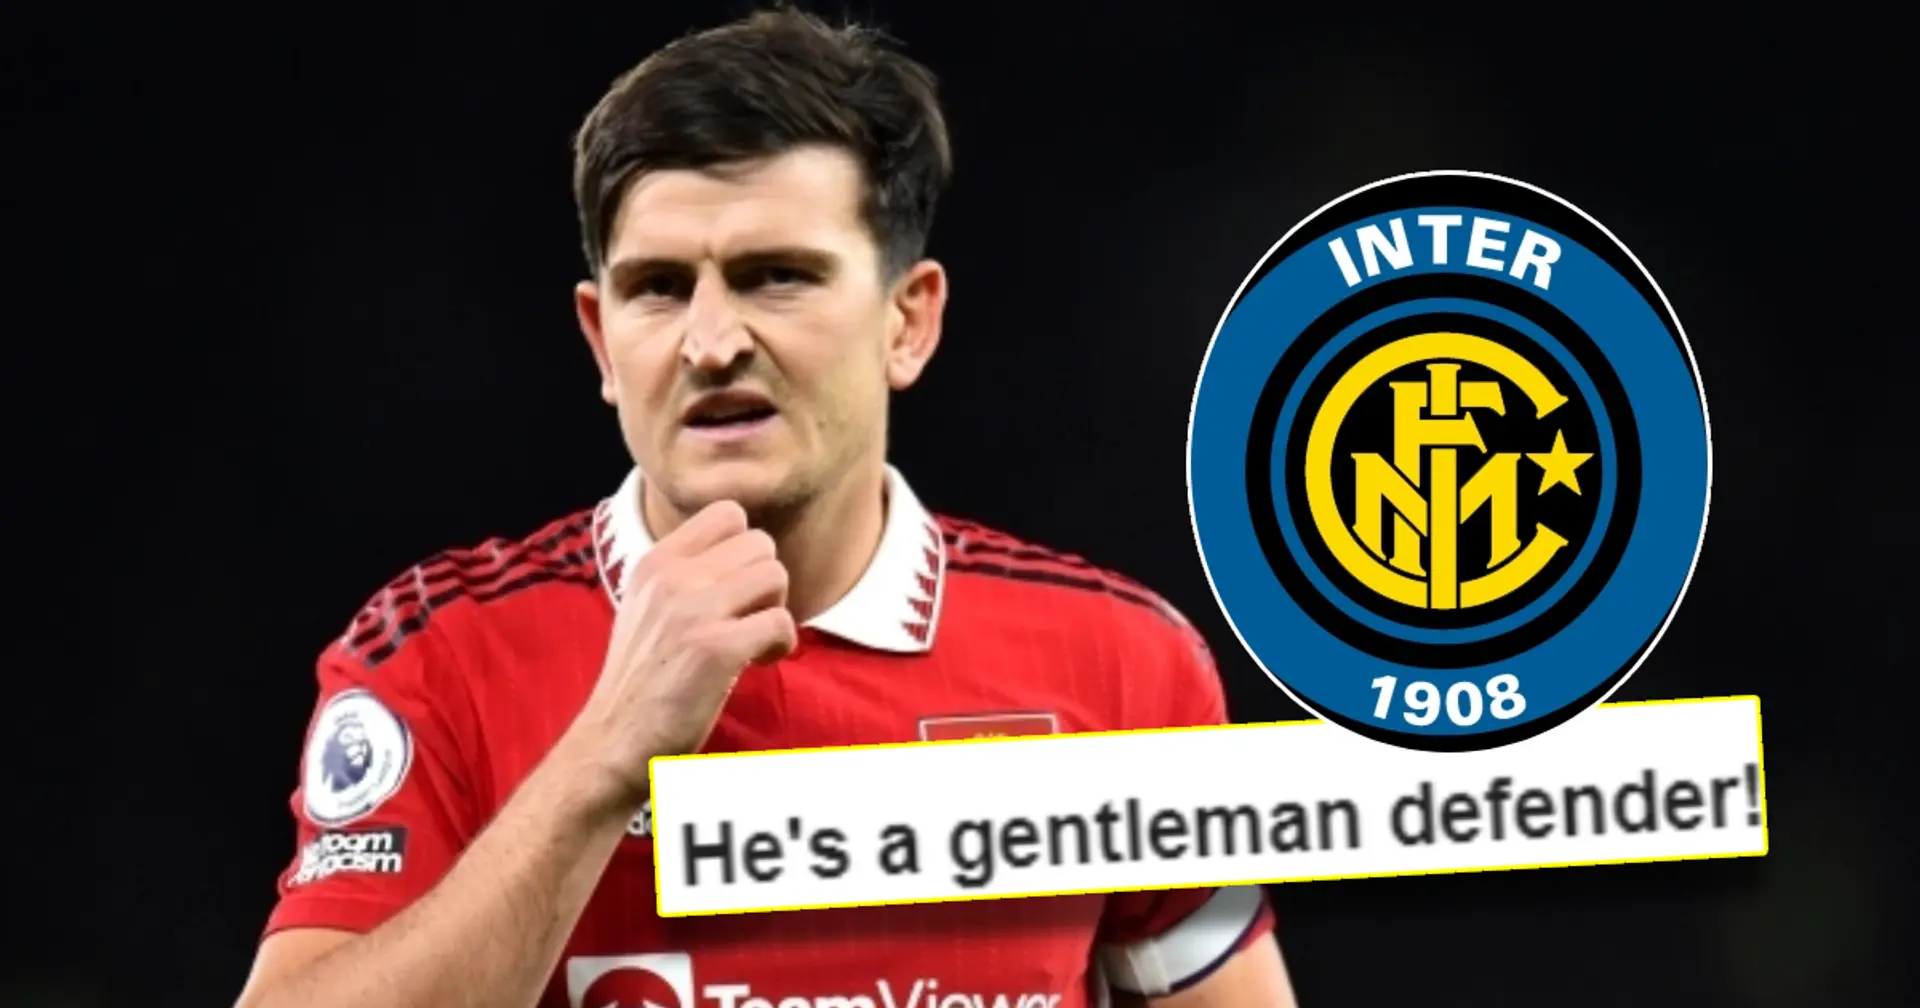 'He's not fast but I'd take him': Inter Milan fans react to Maguire loan links